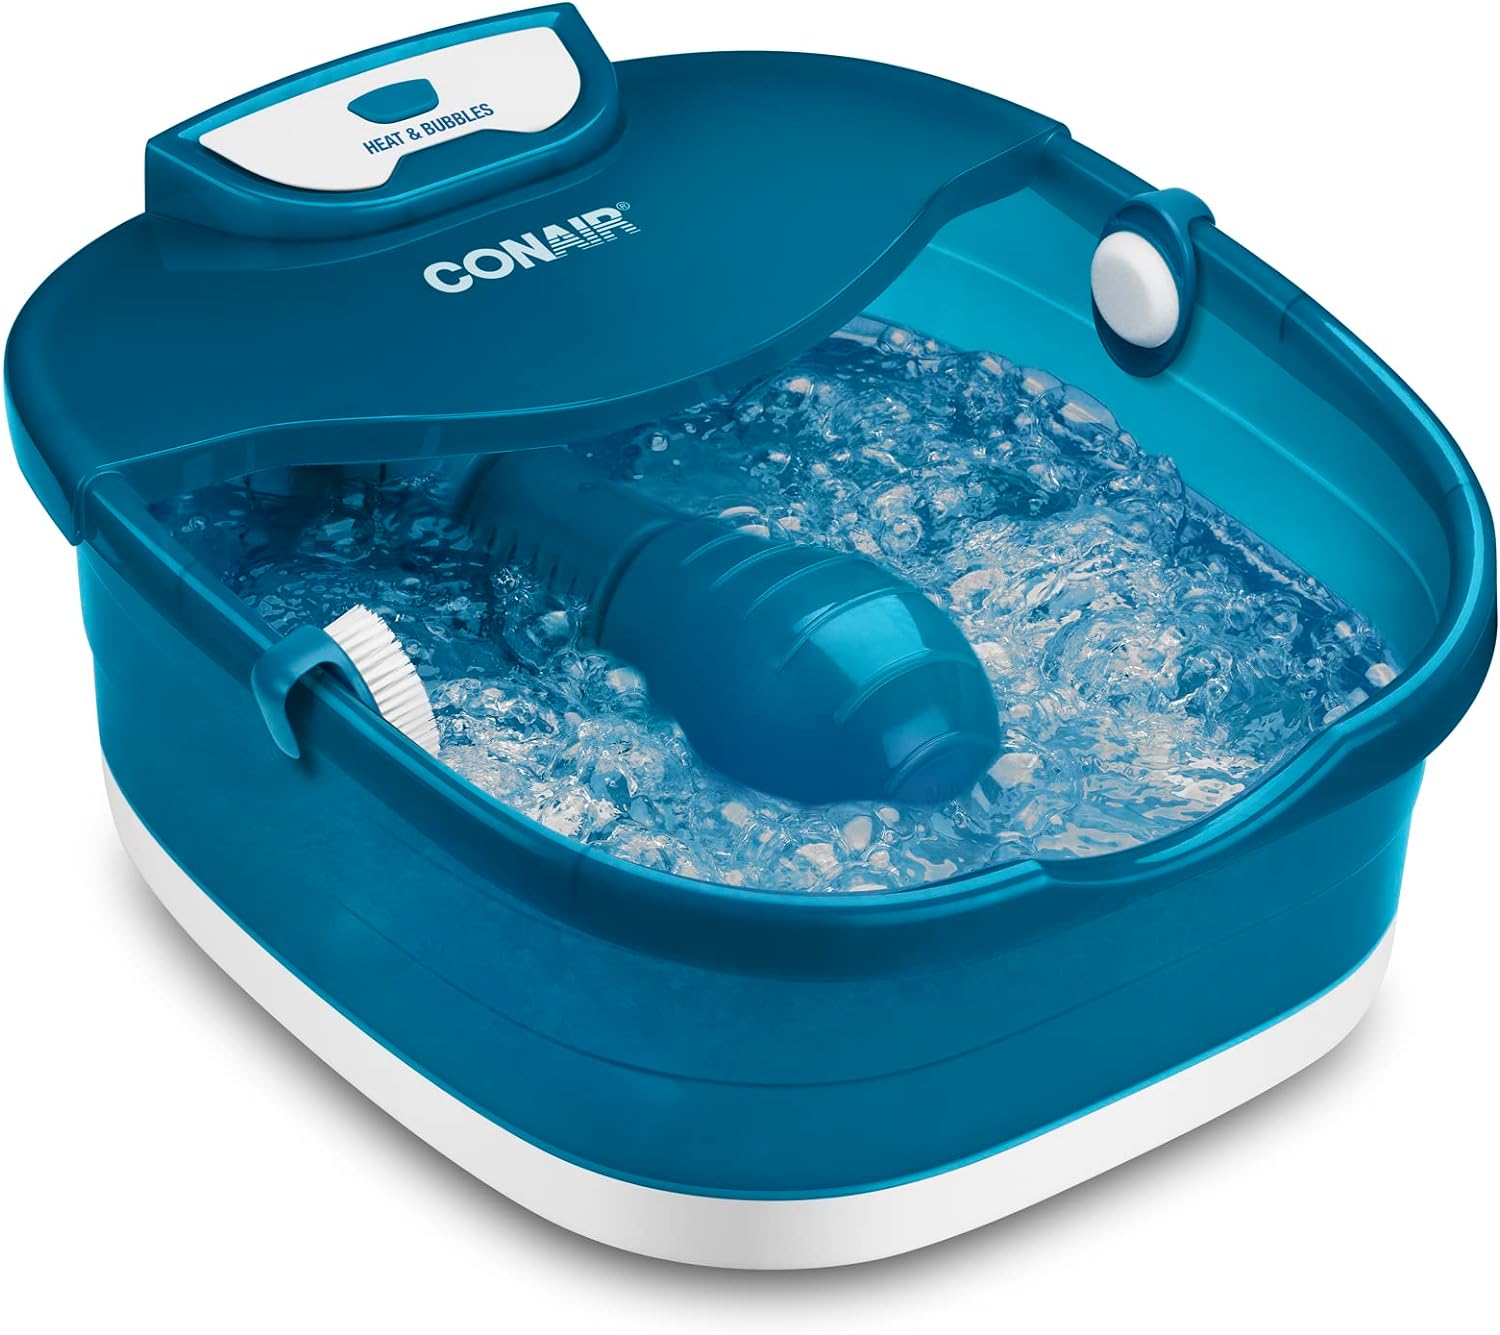 Conair FB90X Foot Spa with Massage, Bubble and Heat